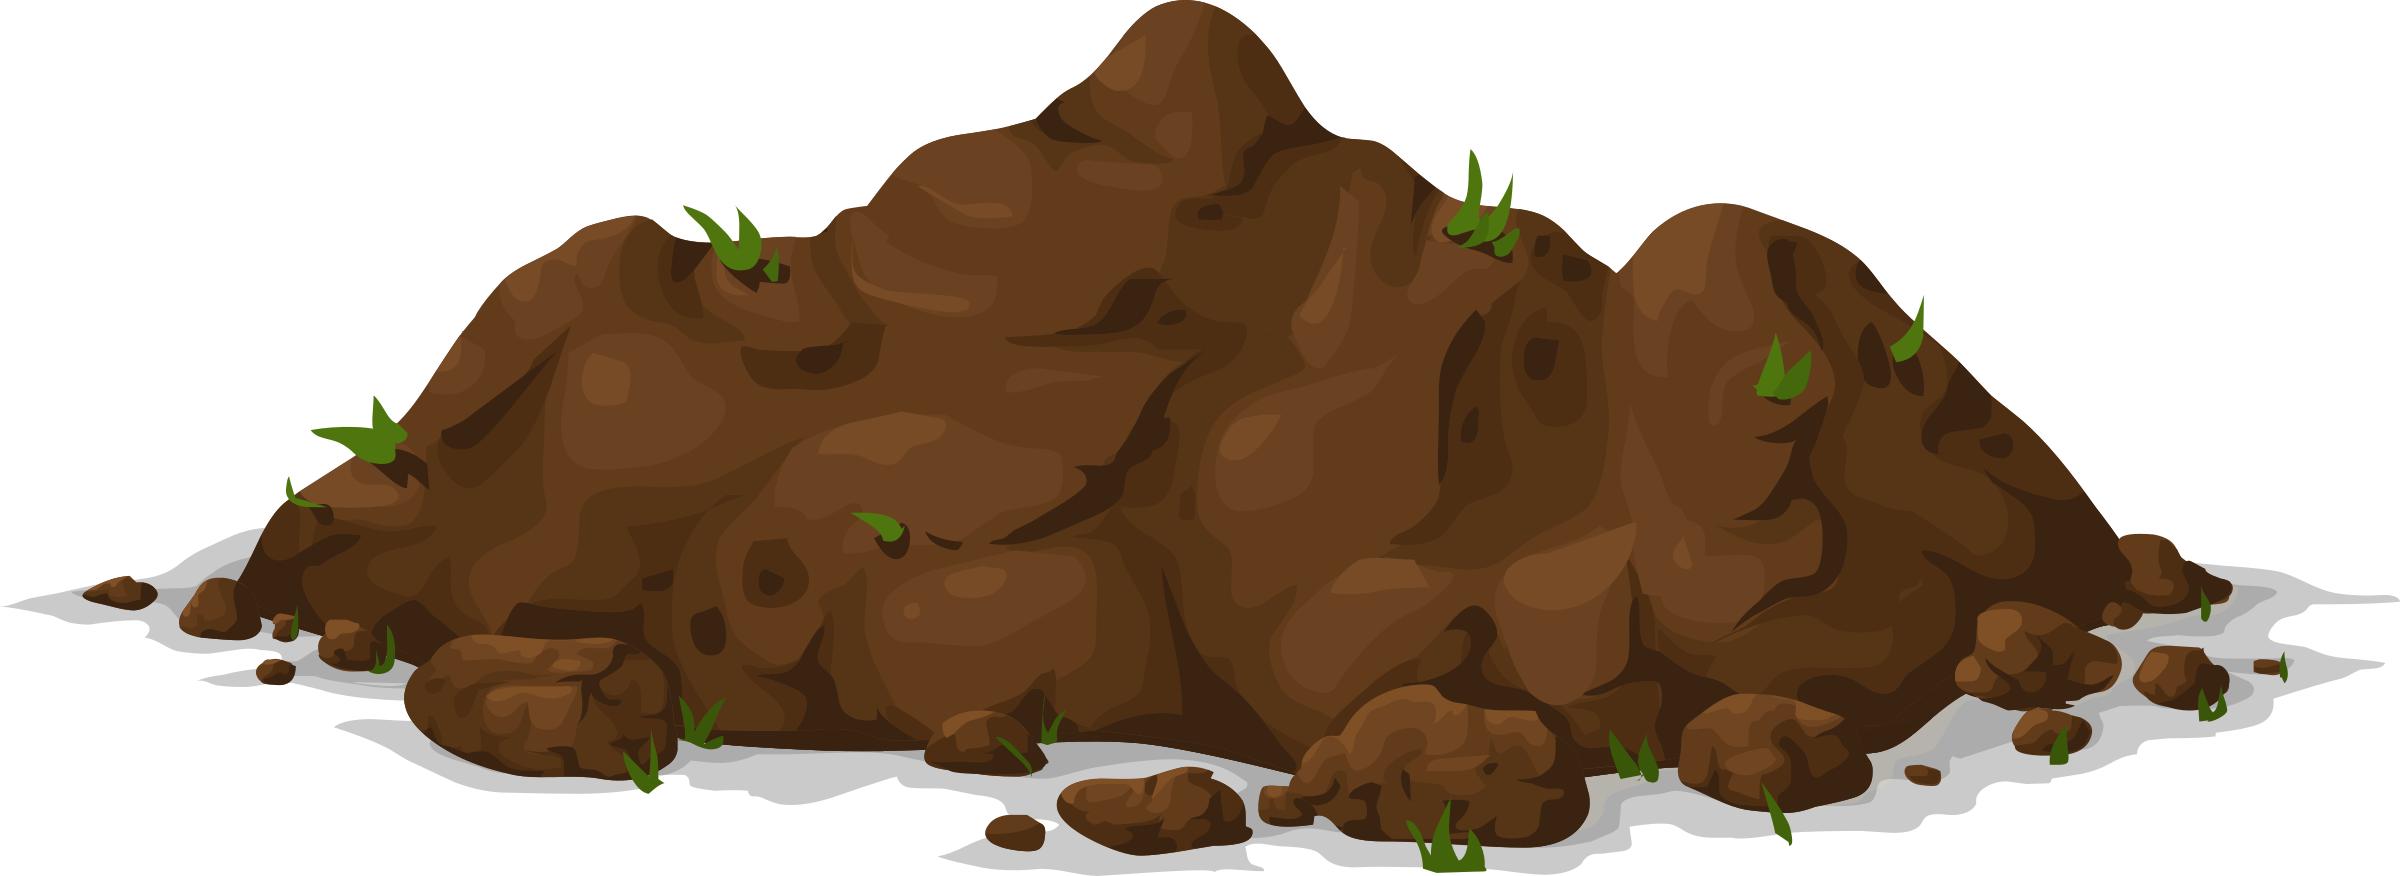 Misc Proto Dirt Pile png